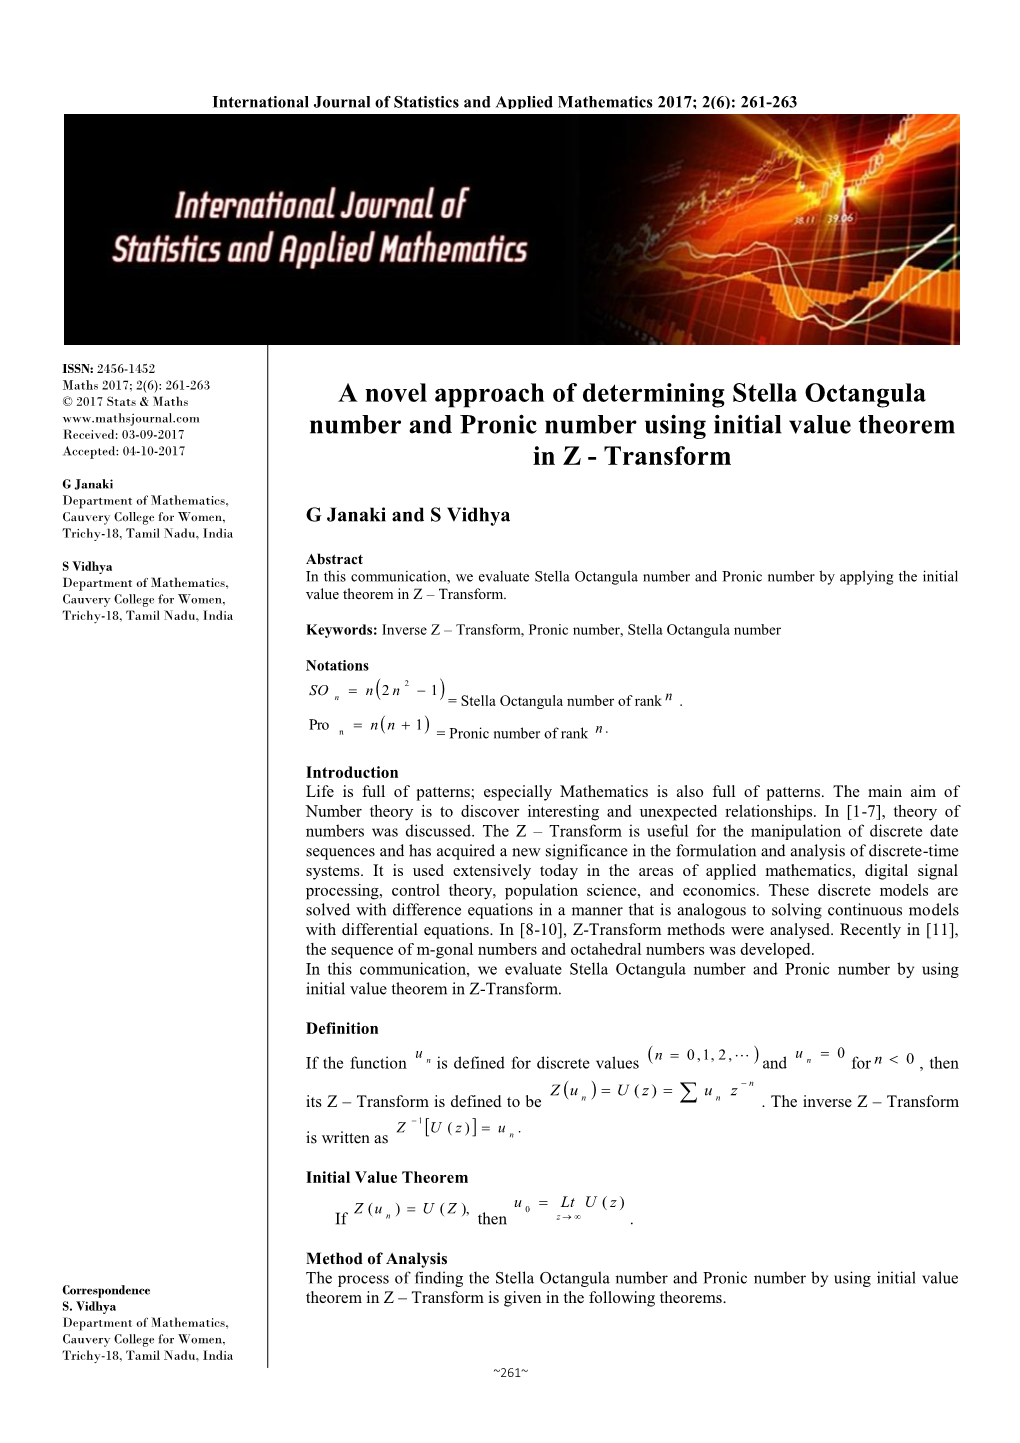 A Novel Approach of Determining Stella Octangula Number And